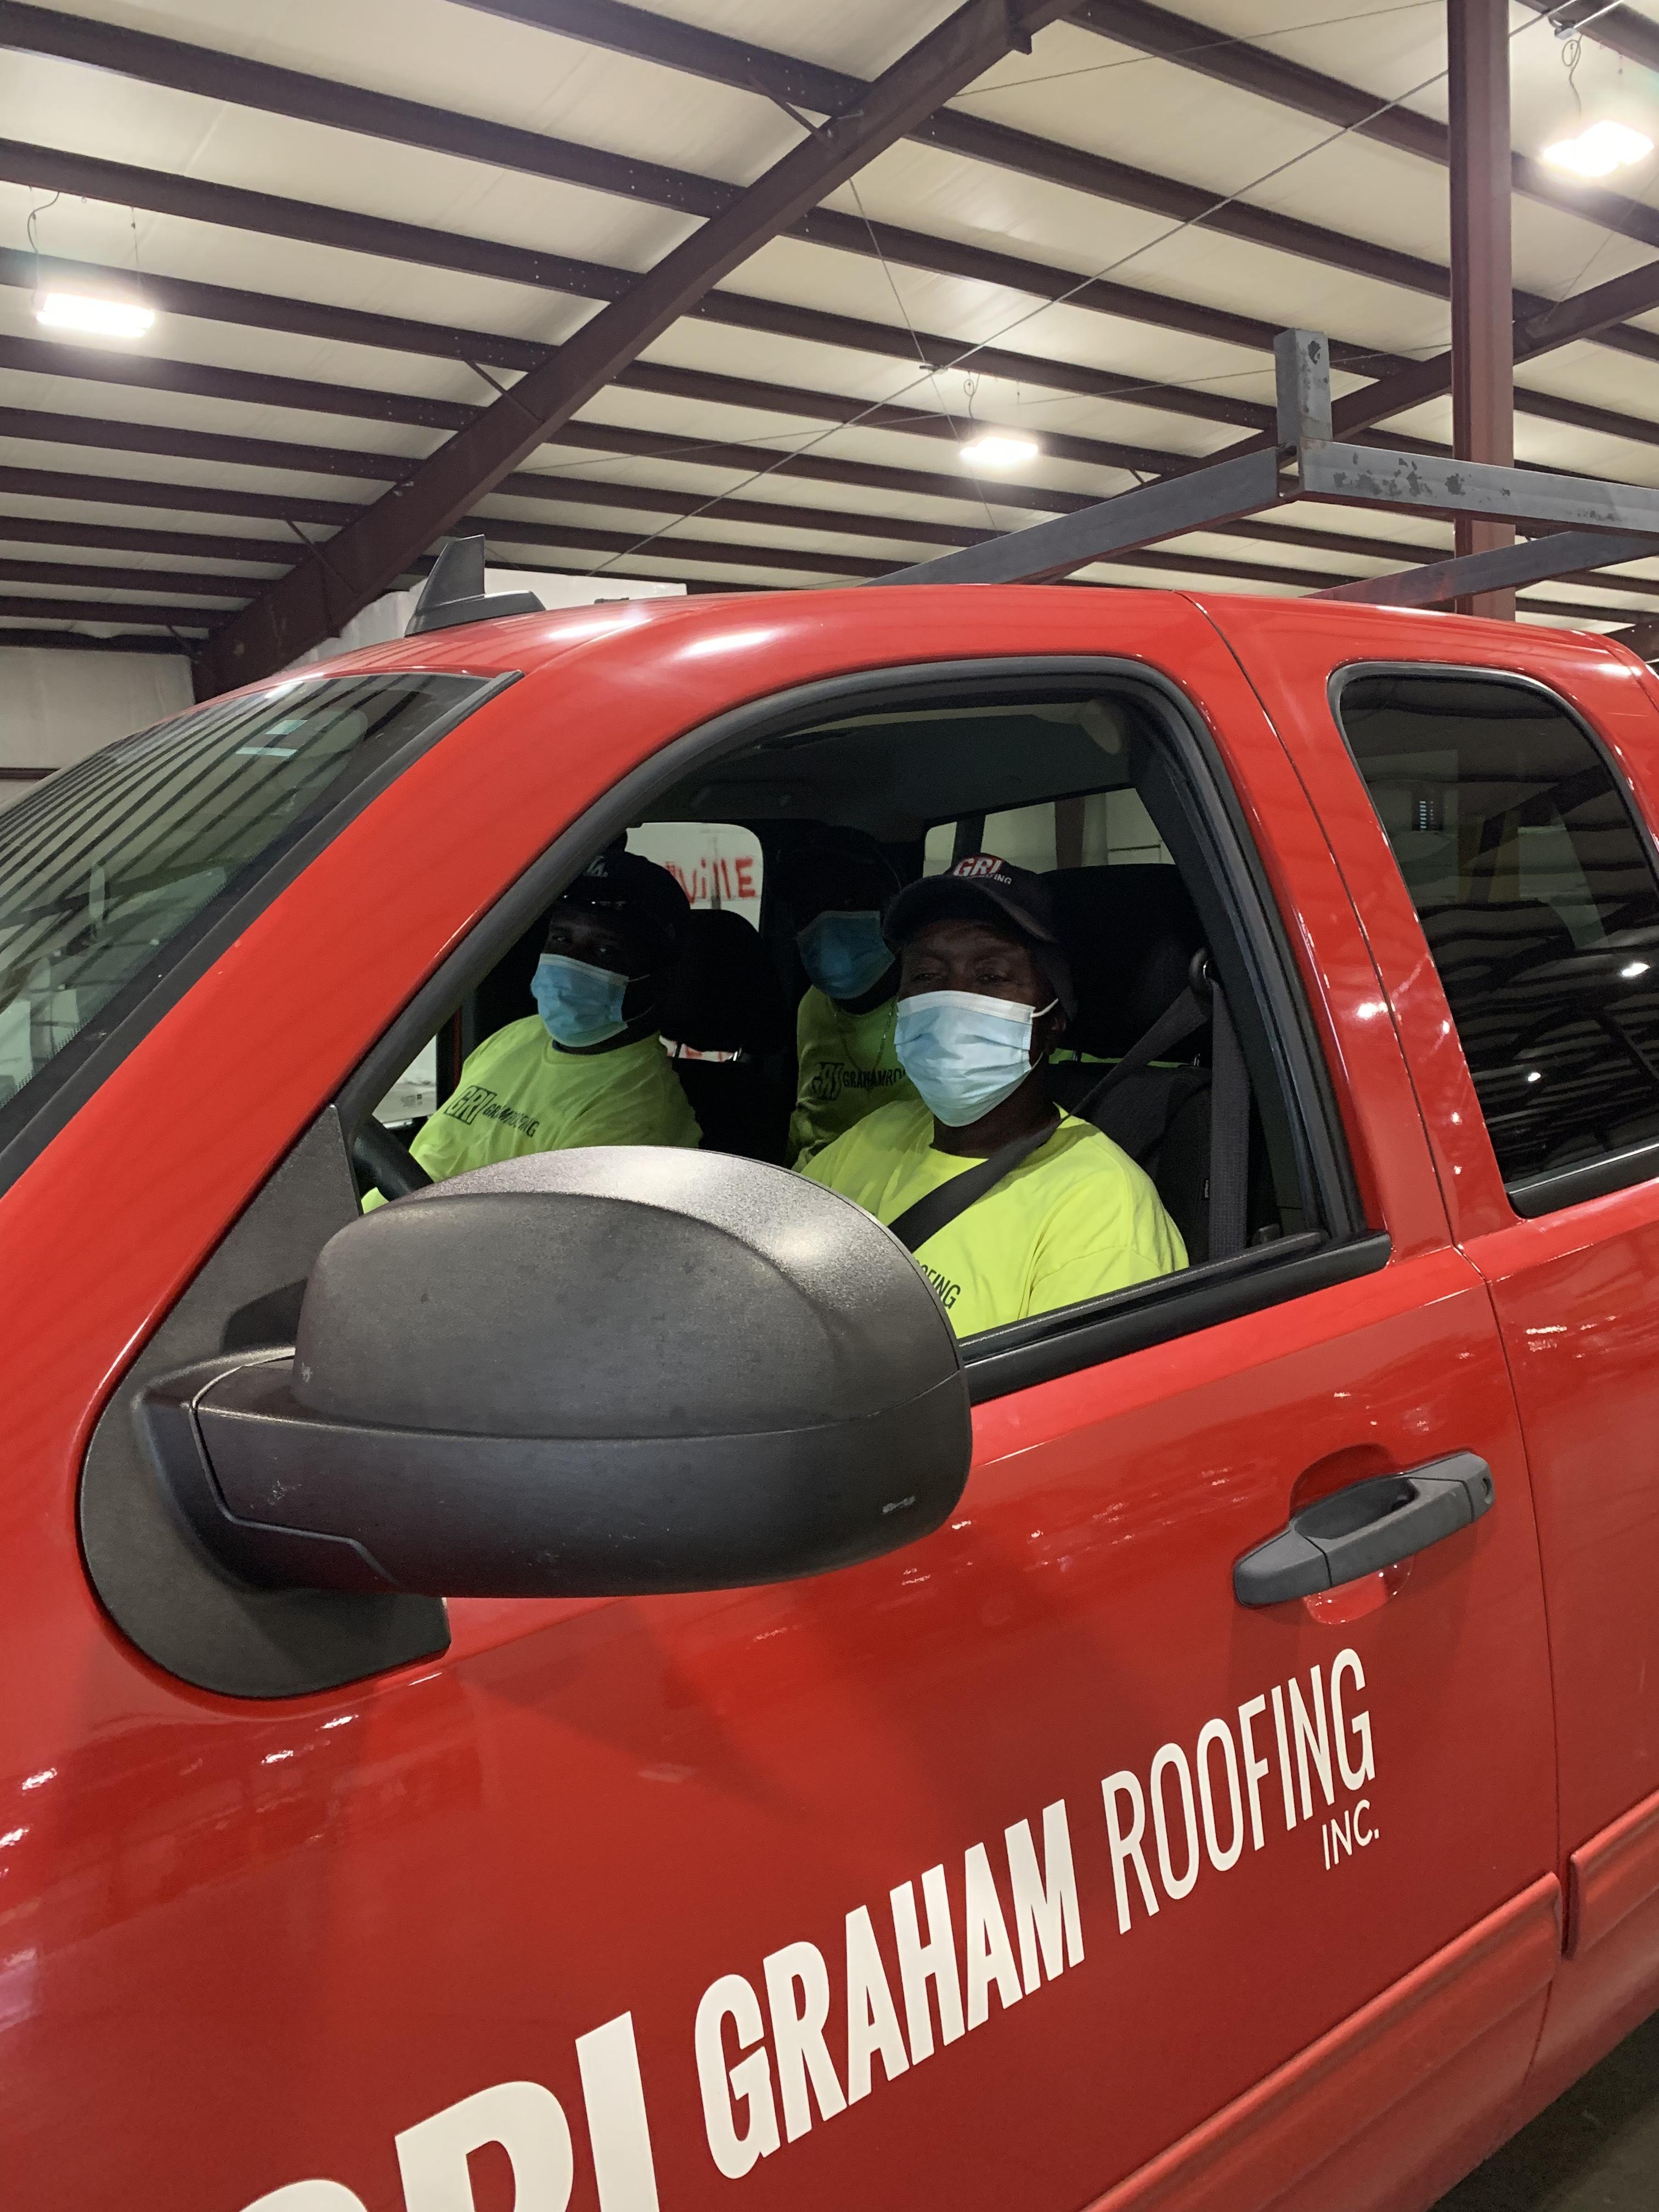 Graham Roofing, Inc.